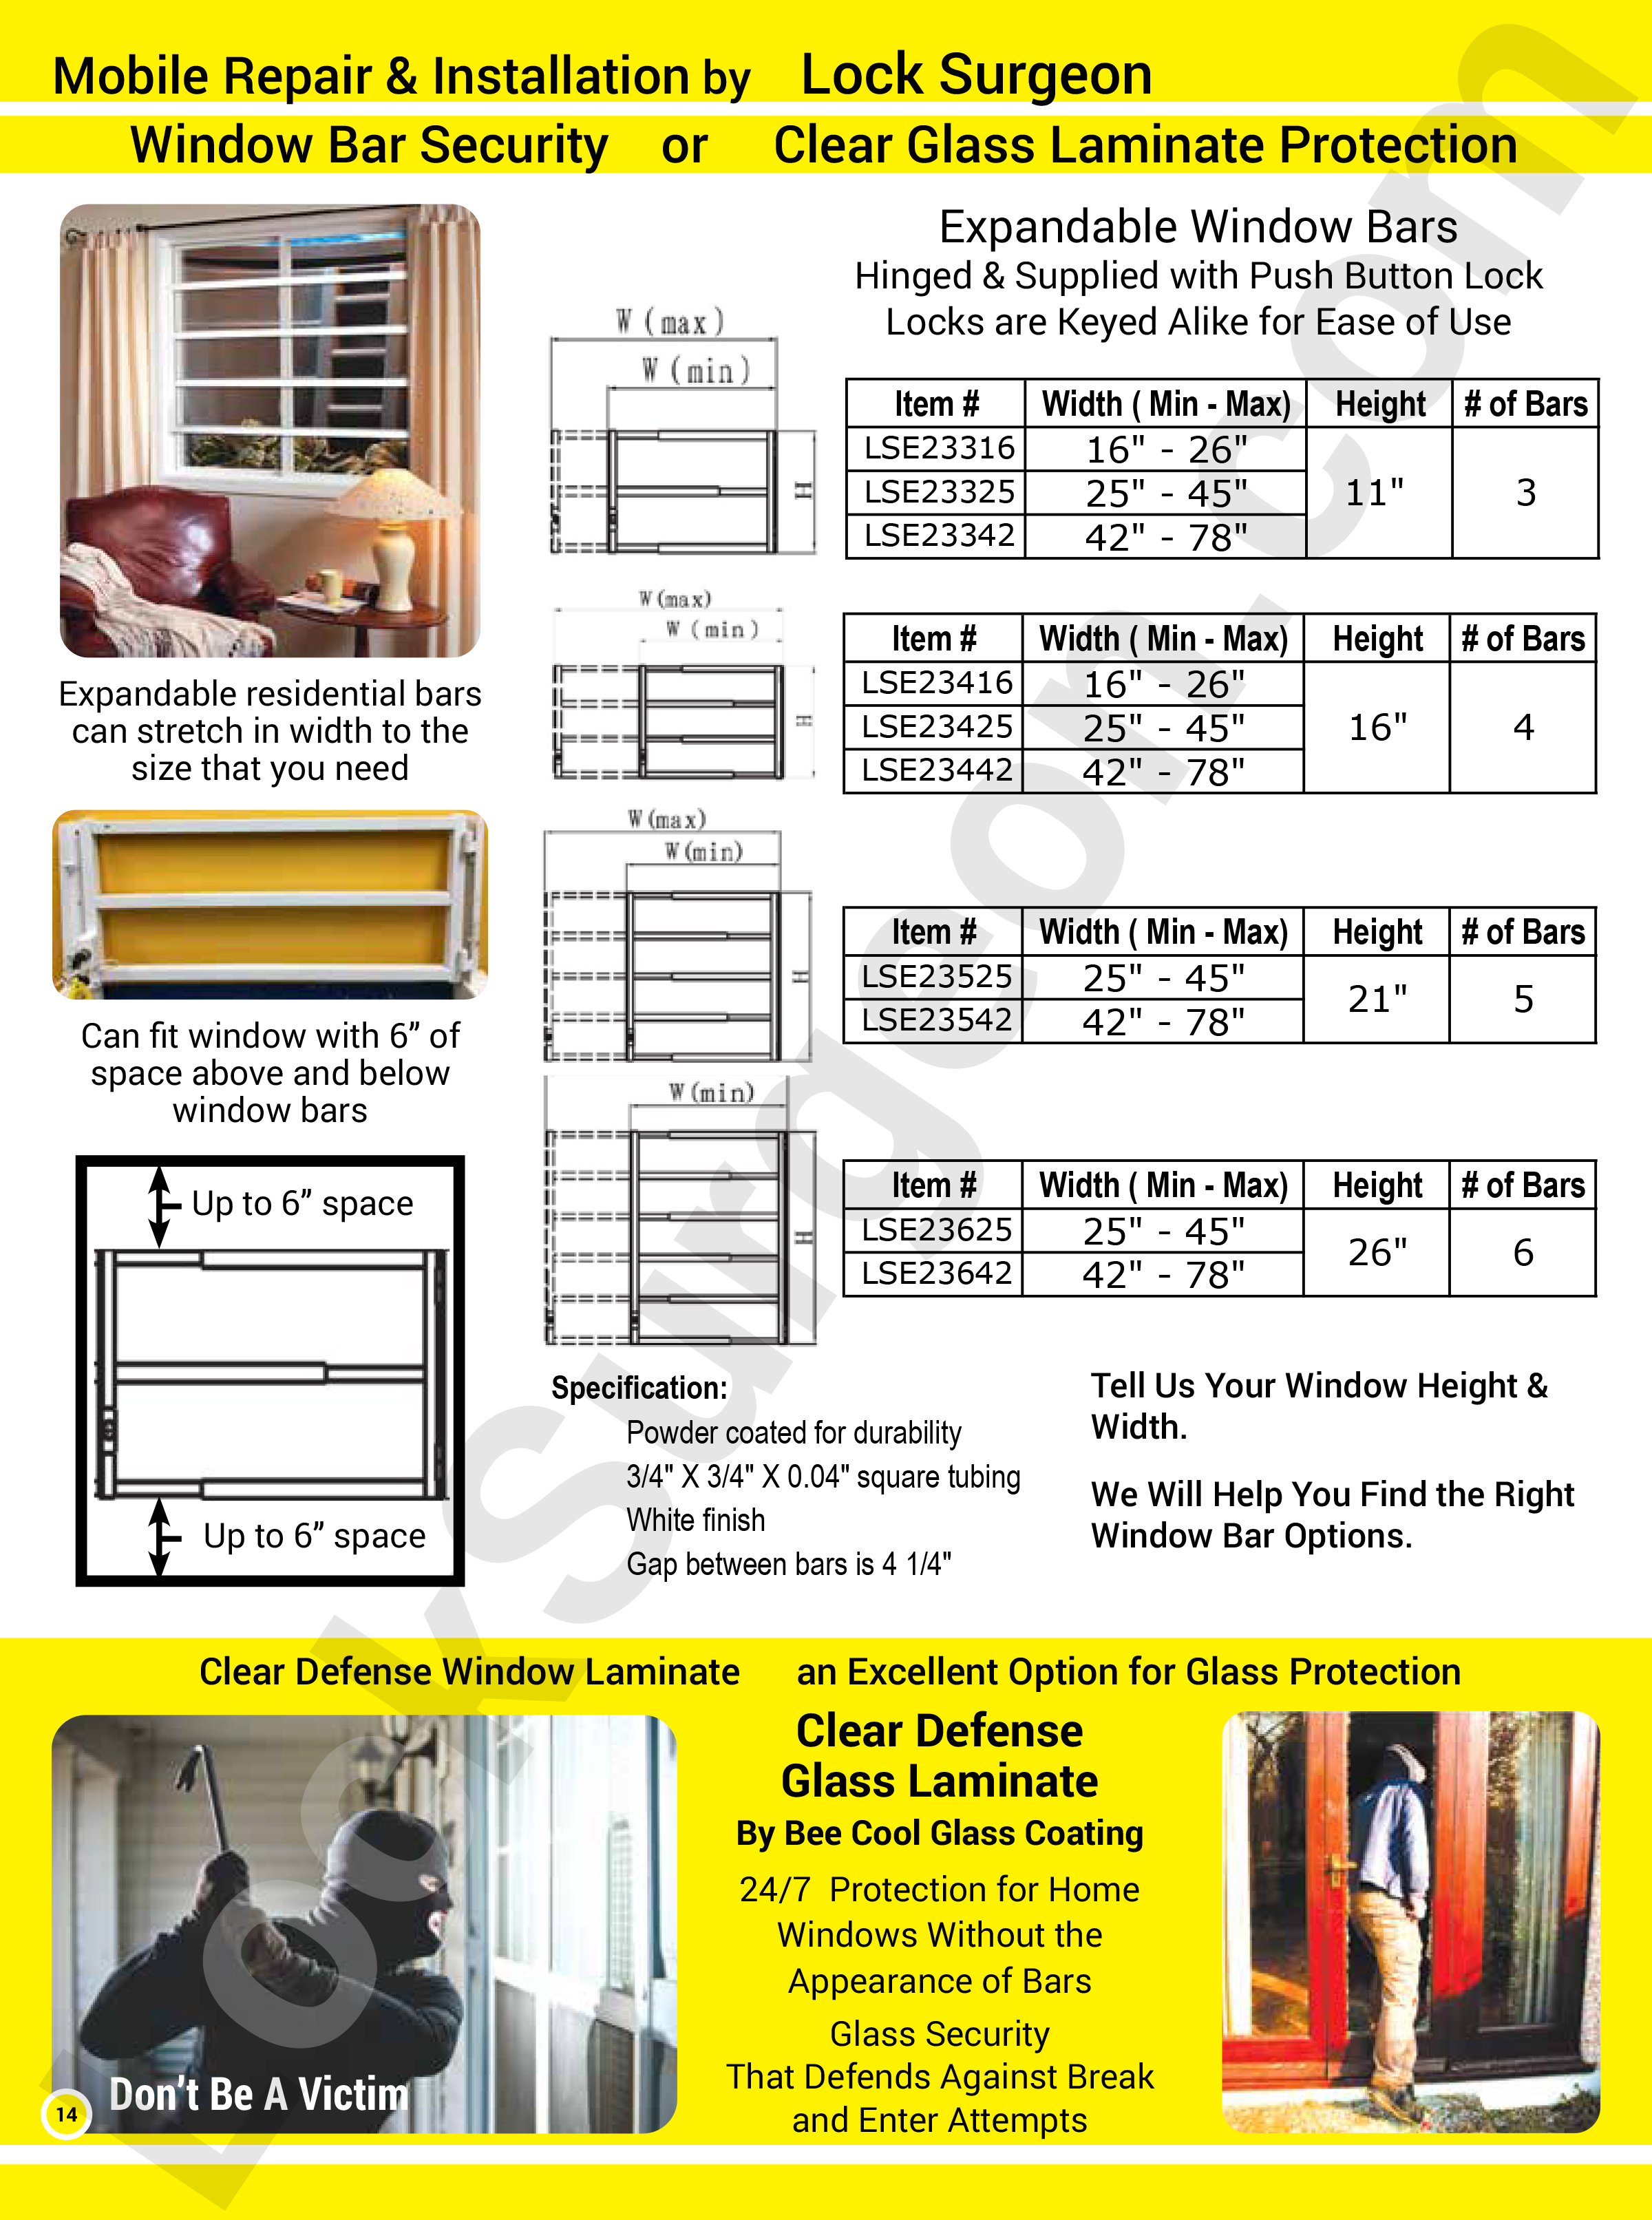 Expandable window bars for home or business window protection. Hinged and supplied with push-button lock, locks are keyed alike for ease of use. Expandable residential bars can stretch in width to the size you need. Clear defense window laminate an excellent option for glass protection. Protection for hom windows without the appearance of bars. Defends against break and enter attempts.